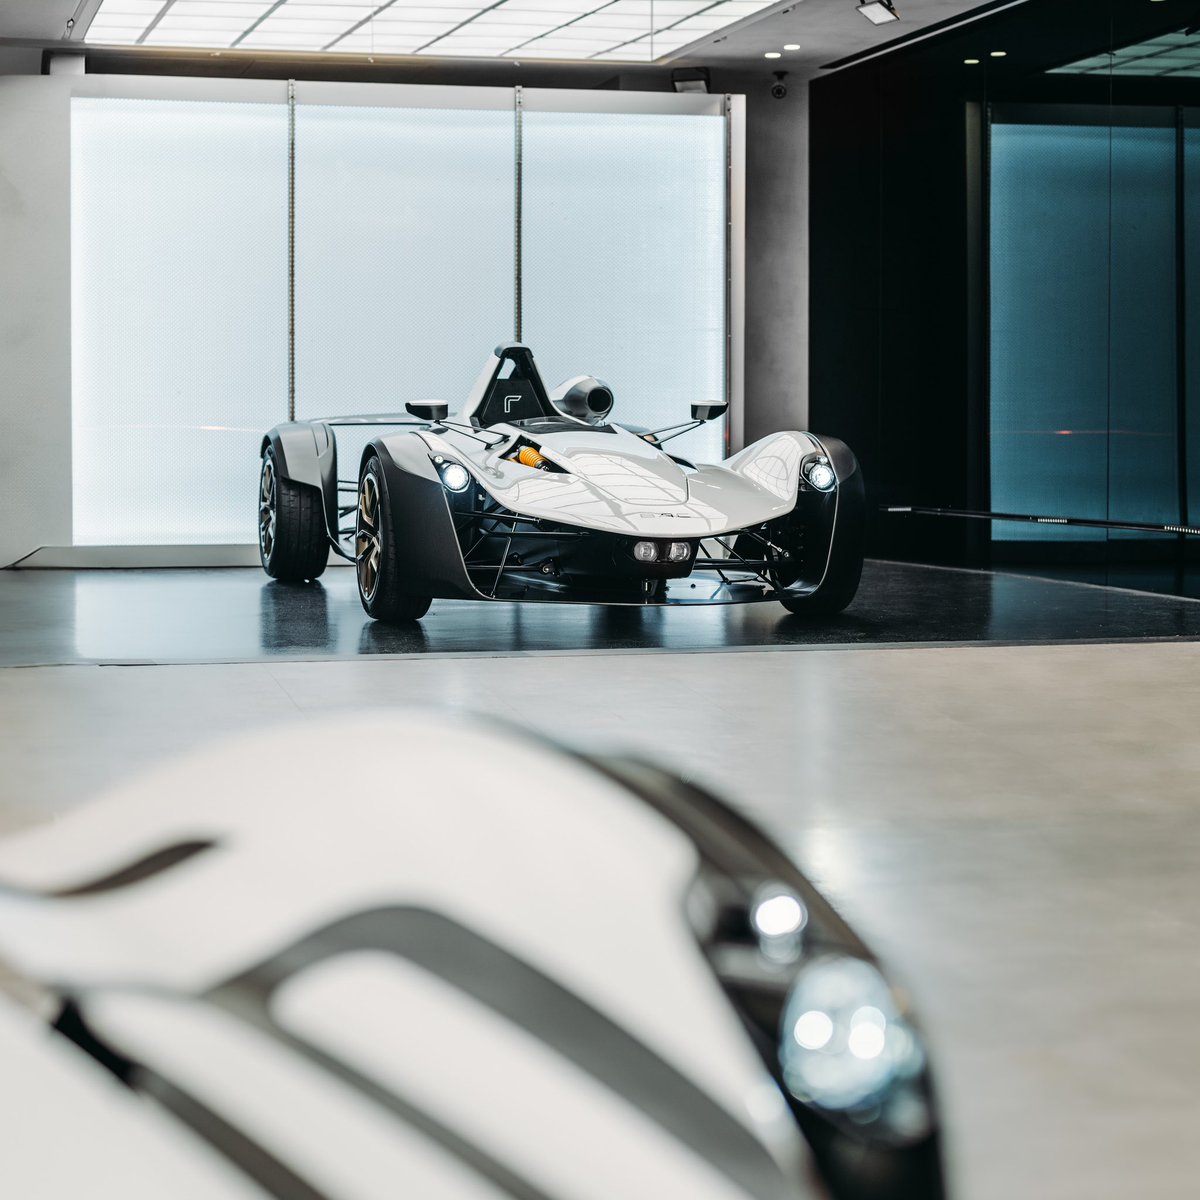 Welcoming the new Mono to Taipei 🇹🇼 Celebrating the first new Mono to be delivered to Asia, BAC Taiwan put together a welcome party to mark the occasion with a gallery display including a very special guest 👀 #BACMono #BACMonoR